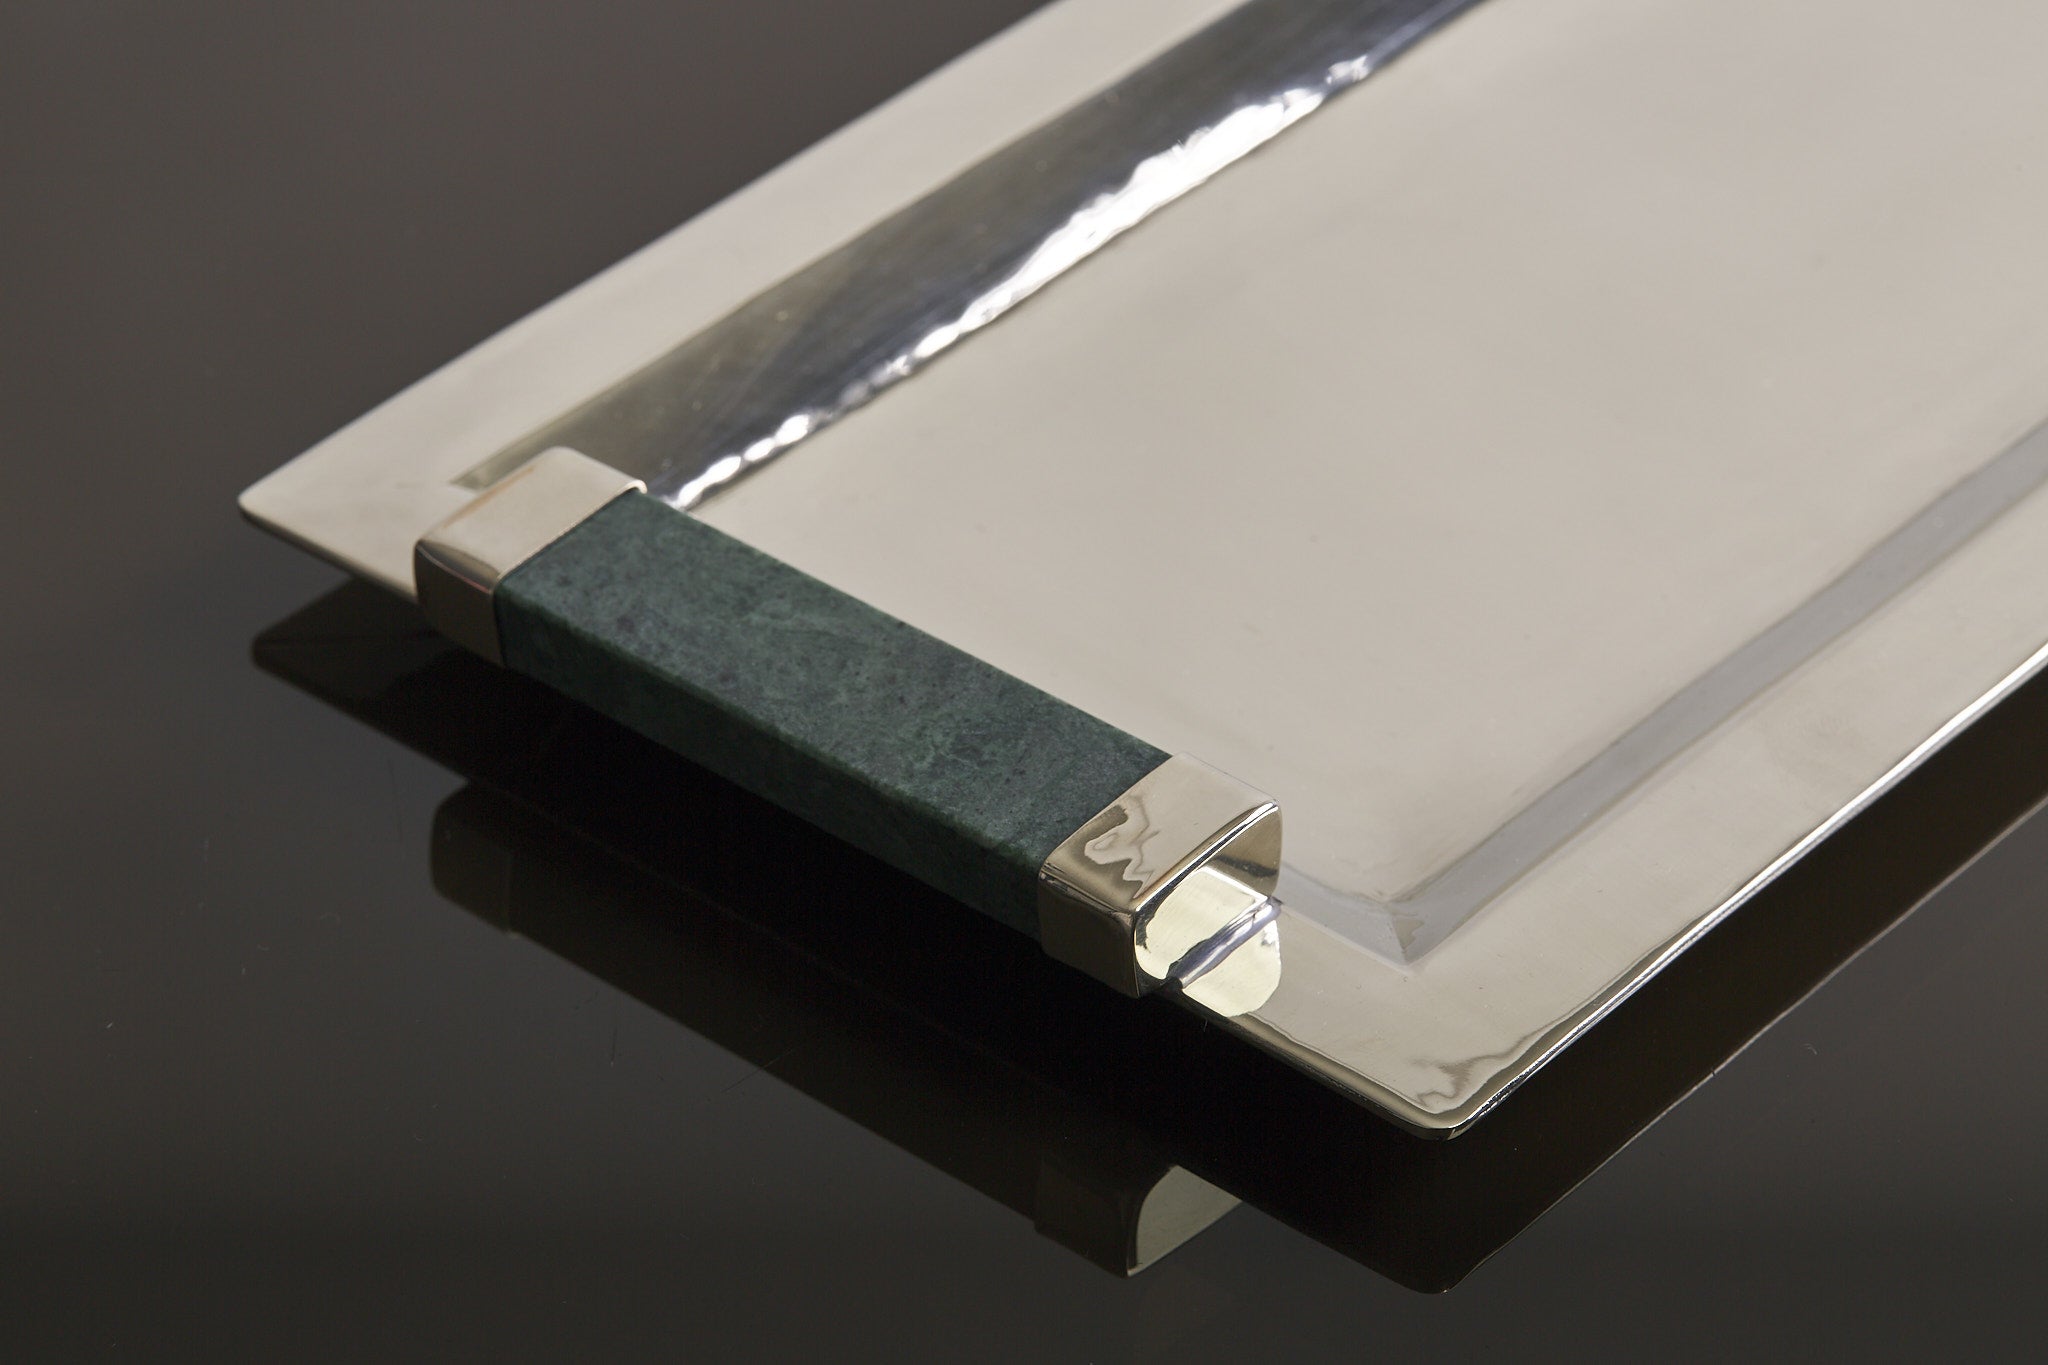 Capa hammered Argentinian alpaca metal tray in rectangular shape featuring green marble handles